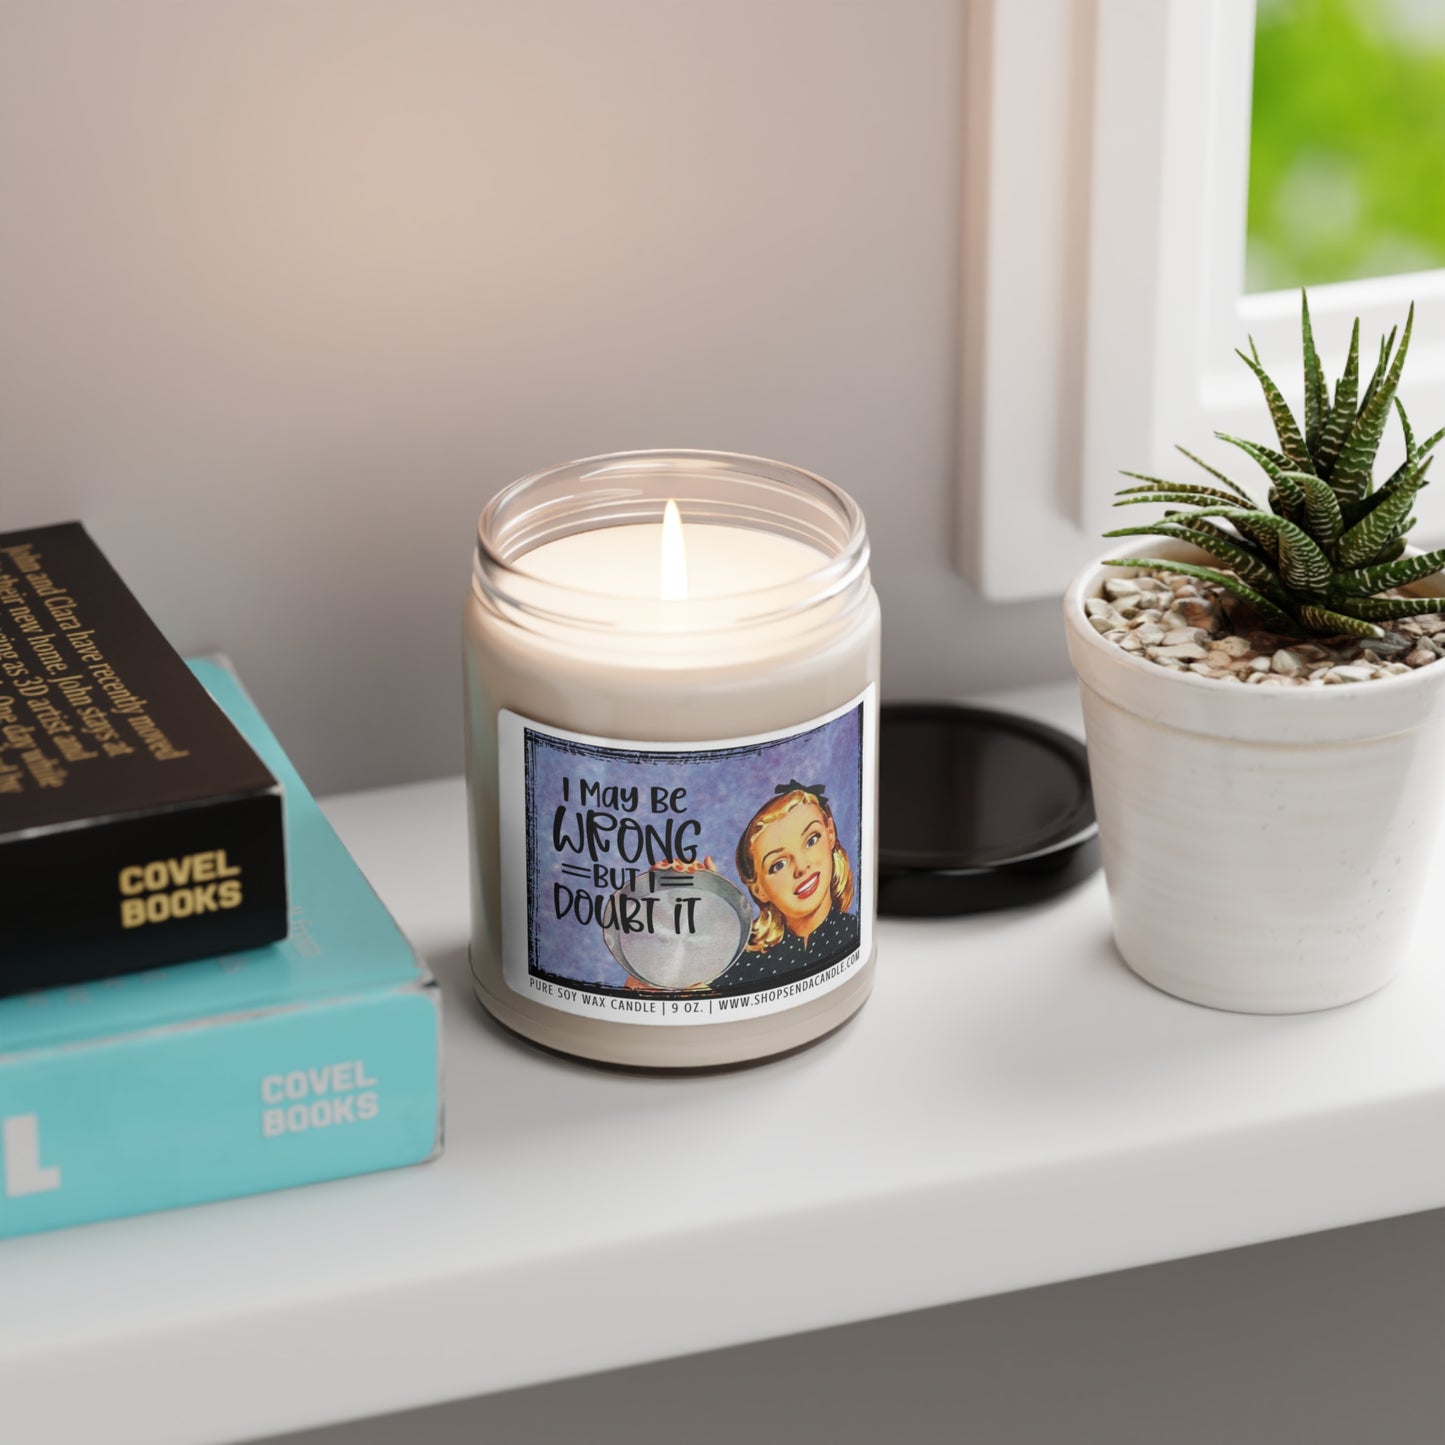 Funny Candles For Coworkers